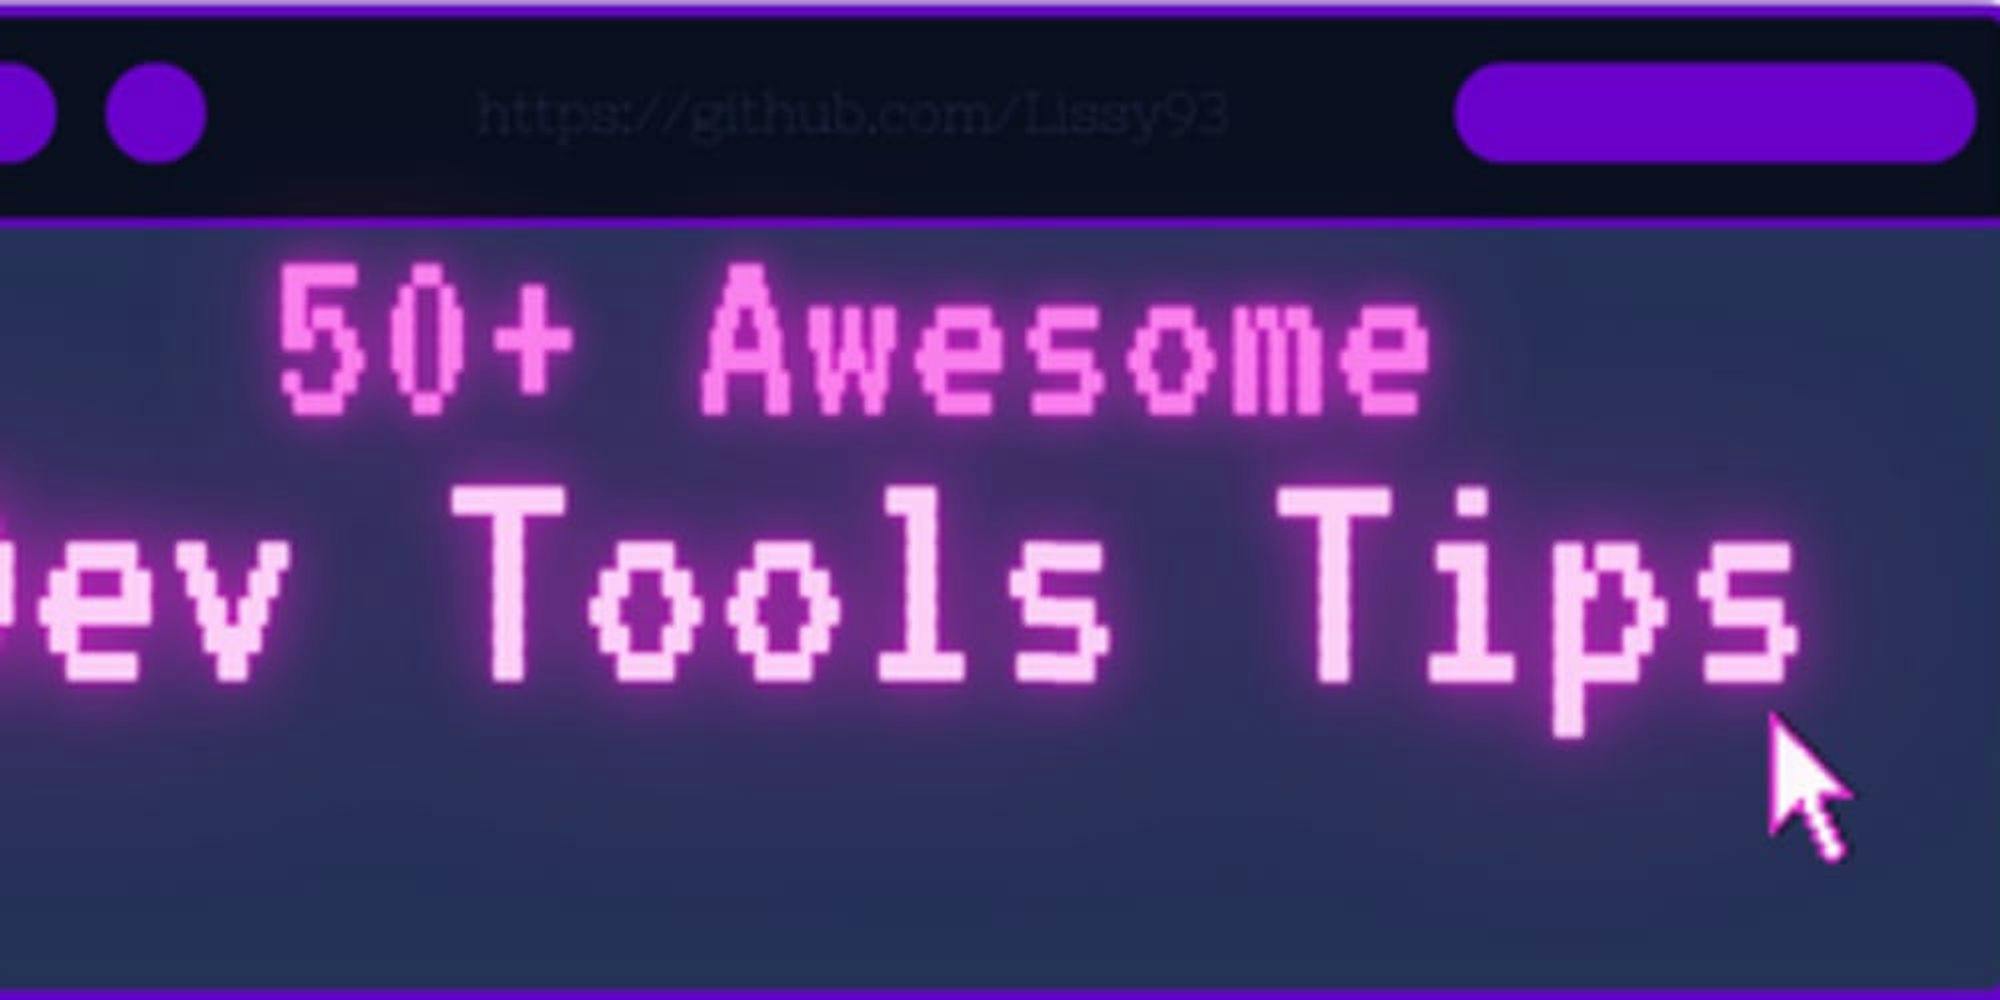 Awesome Dev Tool Tips 🔥